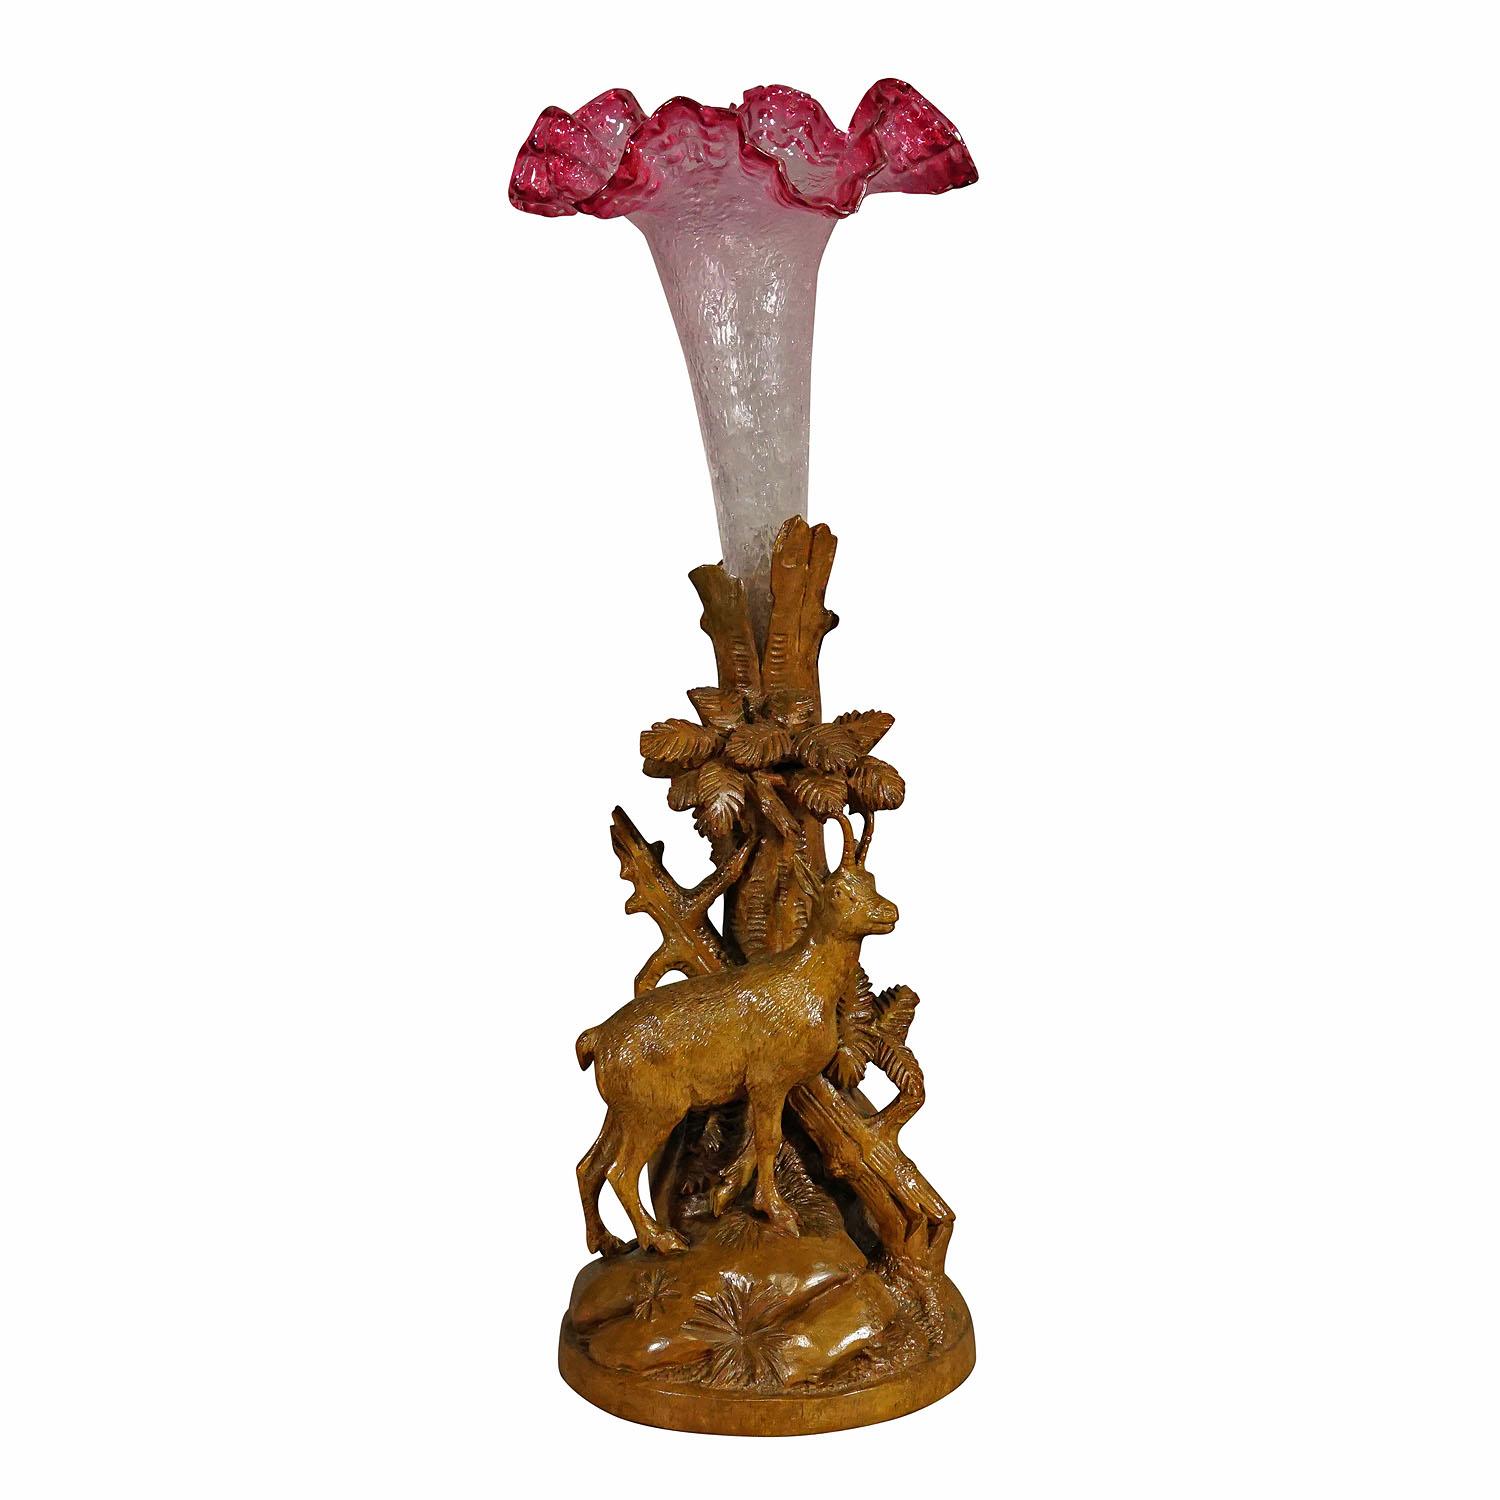 Finely carved wood chamois with glass vase, Brienz, circa 1900.

A delicately hand carved wood sculpture of a chamois standing on a rocky base with three stump which features an antique glass vase inset. A very detailed and natural carving excecuted